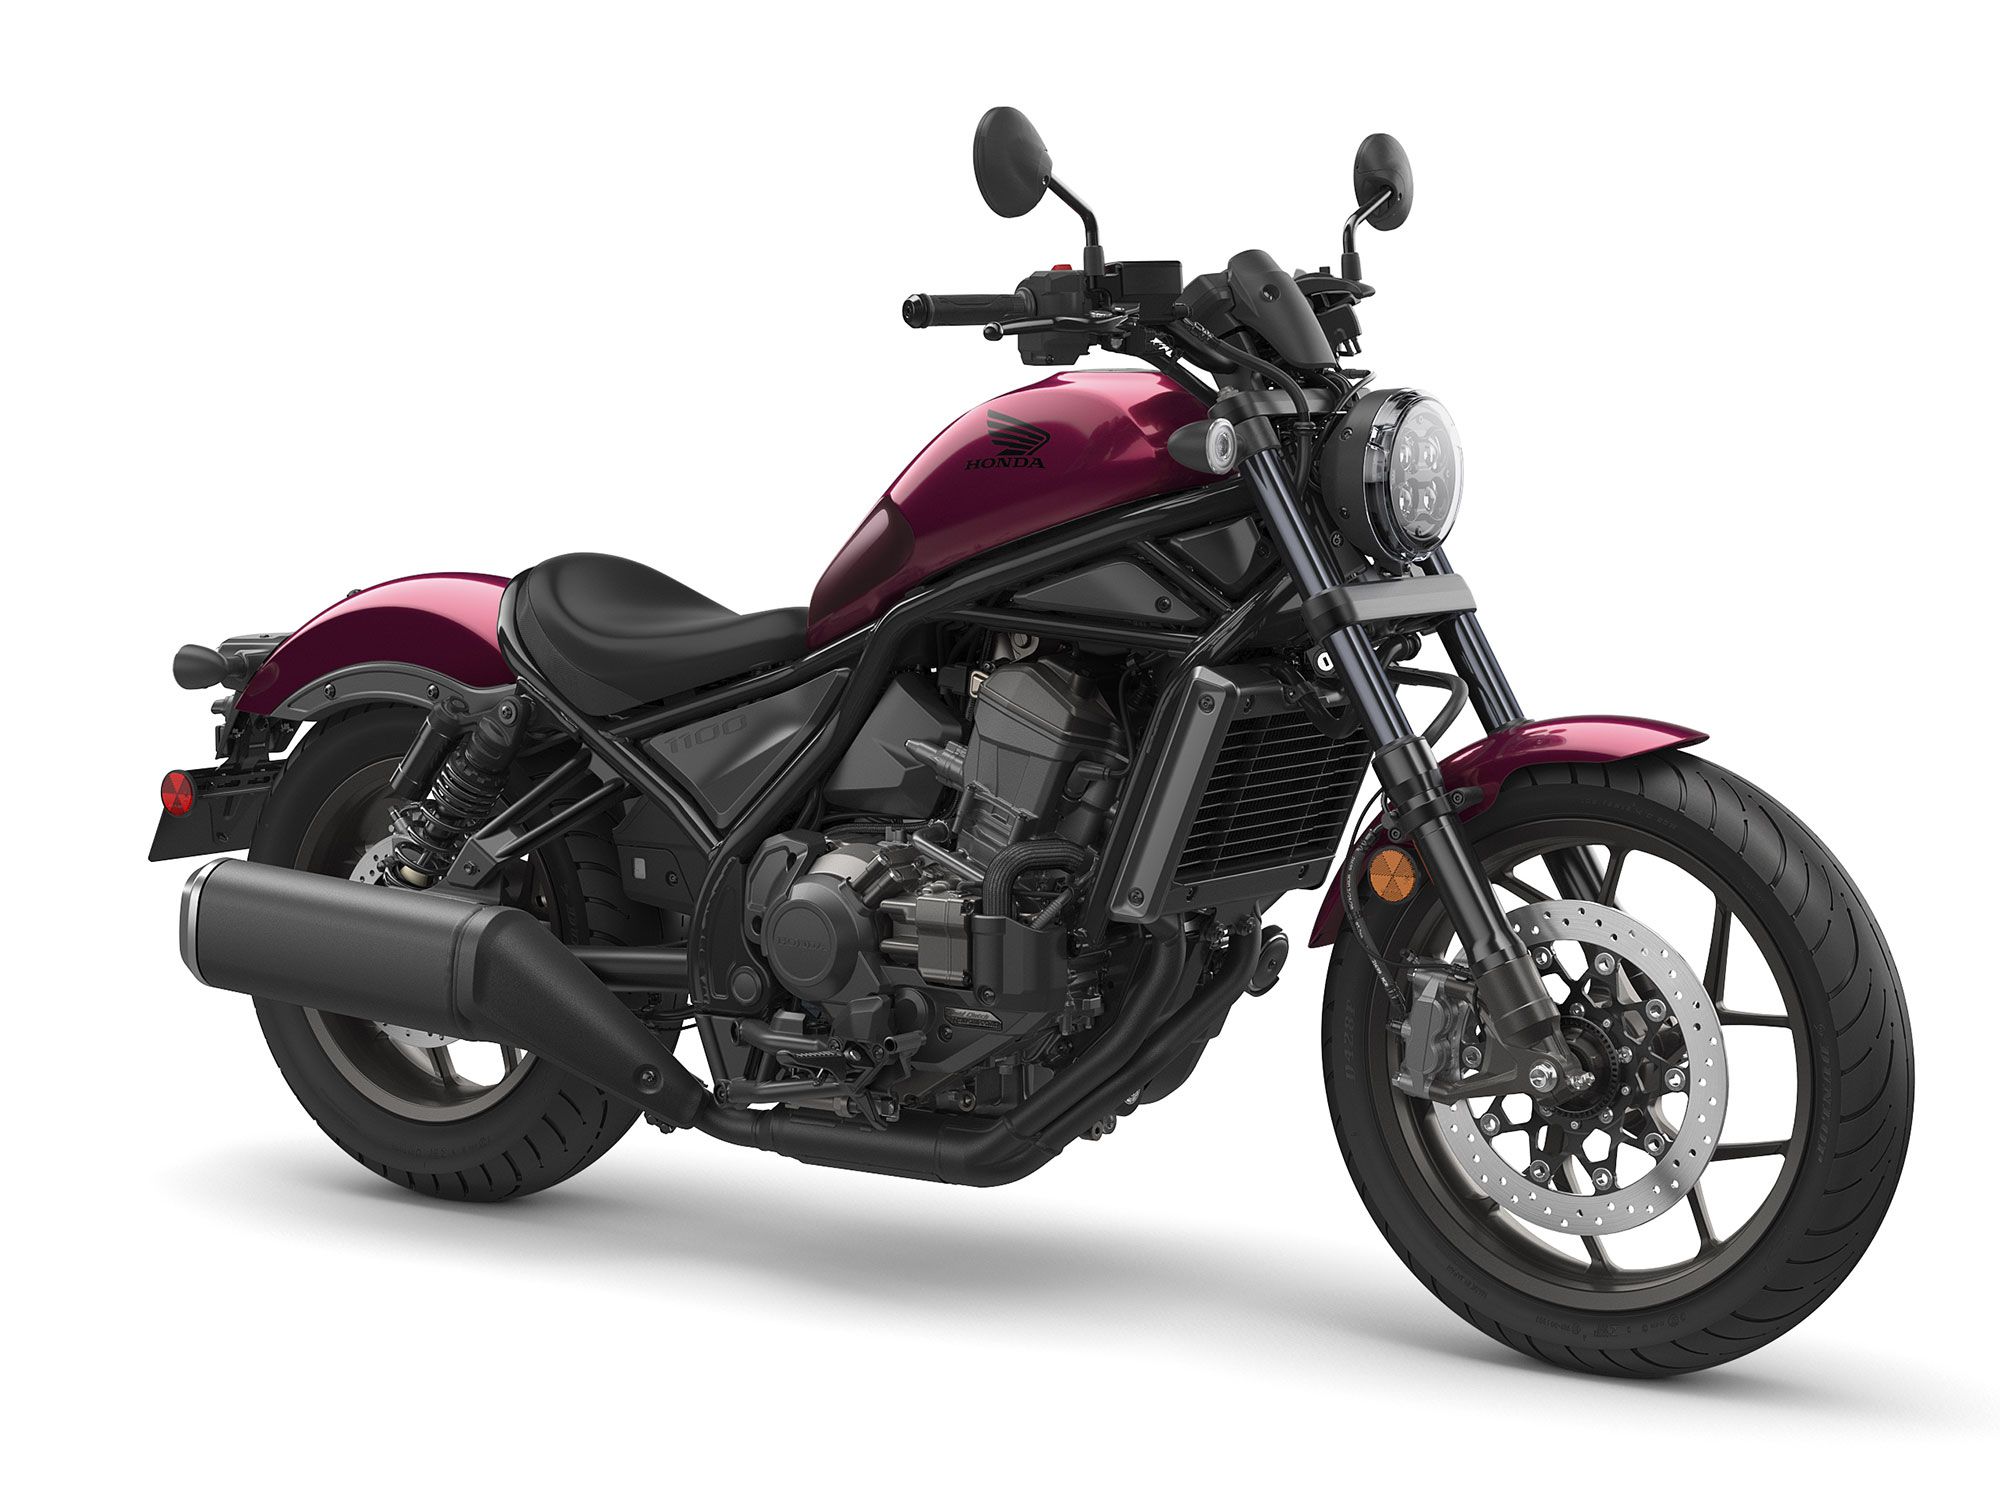 Along with a big new Rebel, Honda also offers riders the choice of DCT cruising.